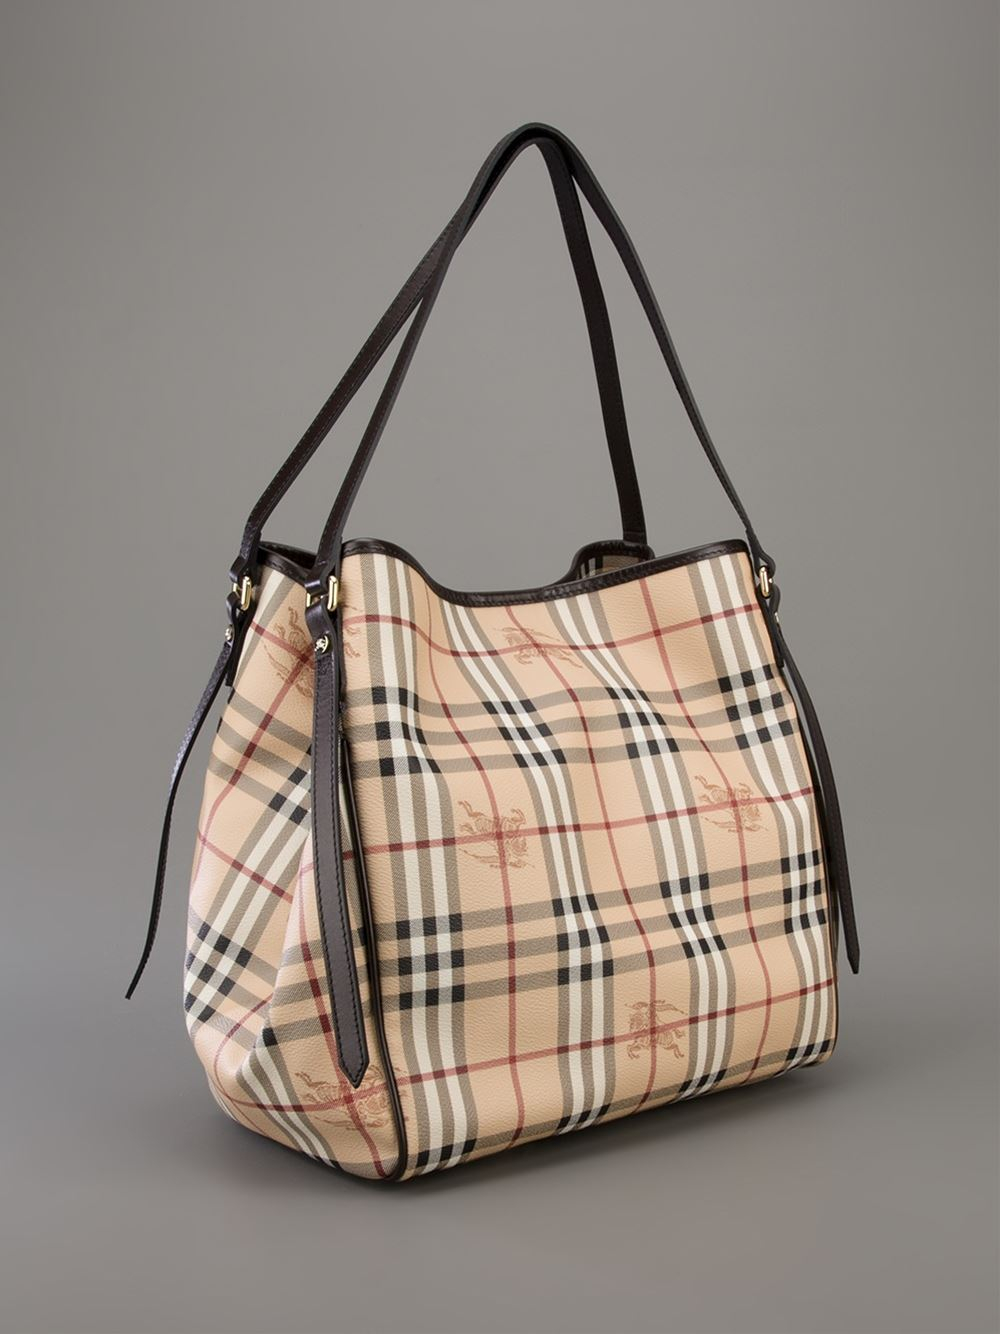 burberry canterbury tote Online Shopping for Women, Men, Kids Fashion &  Lifestyle|Free Delivery & Returns! -